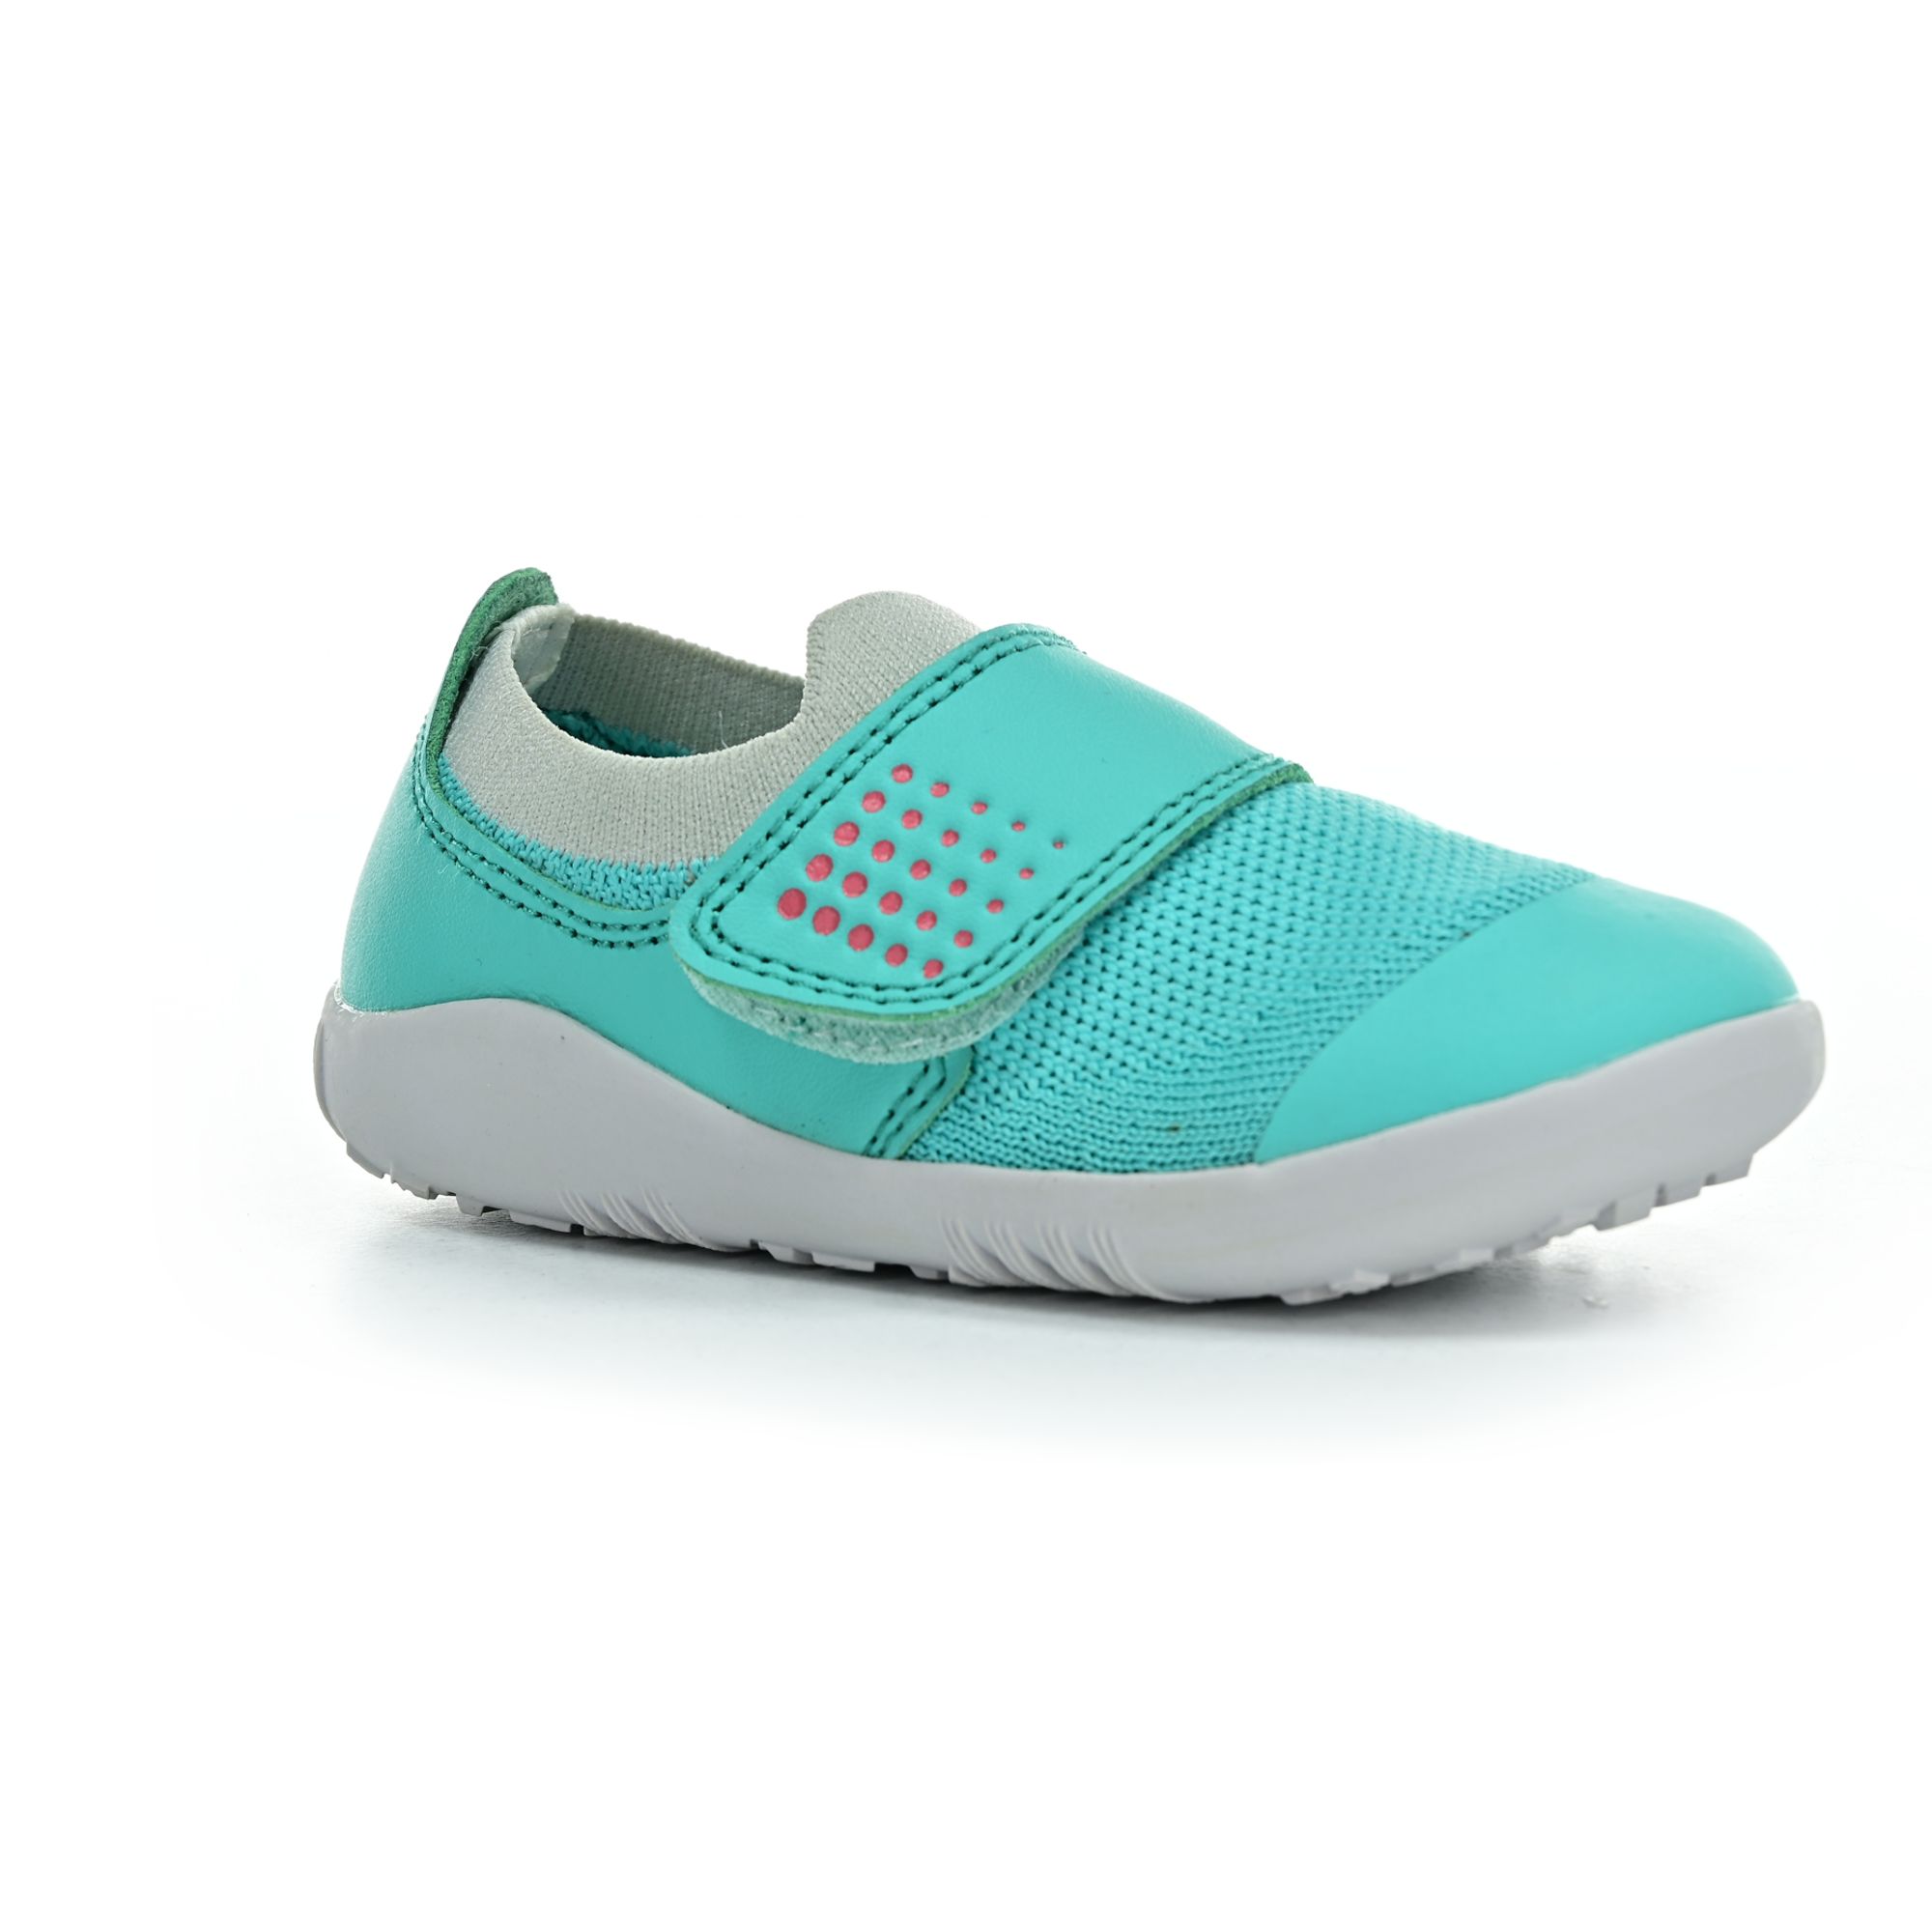 Levně Bobux Dimension III Turquoise + Steam barefoot boty